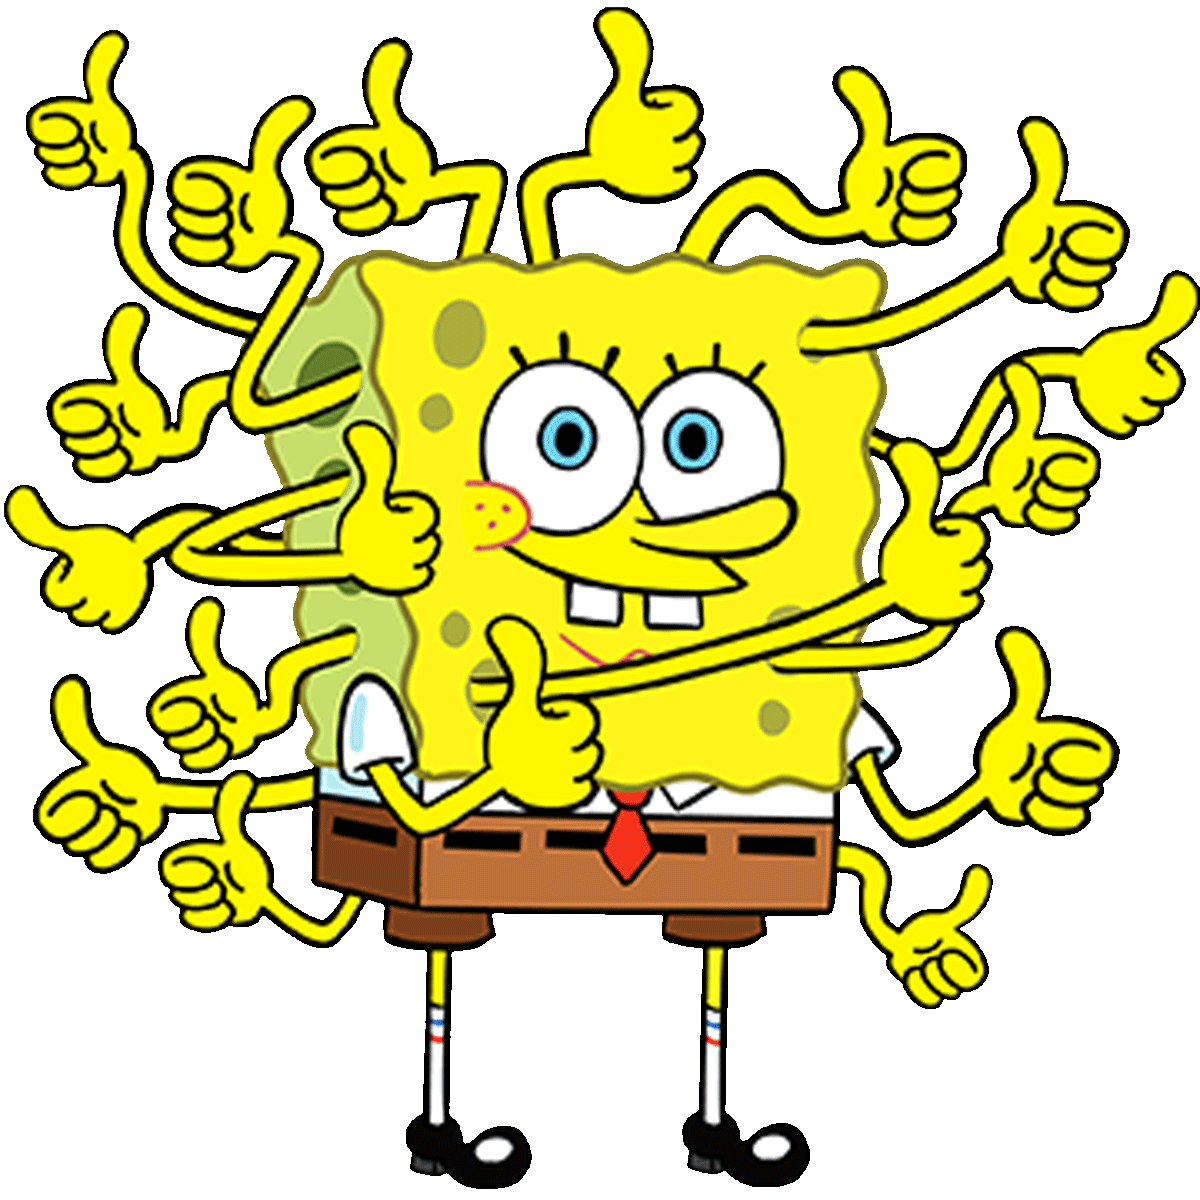 Well Done Thumbs Up Sticker by SpongeBob SquarePants for iOS ...